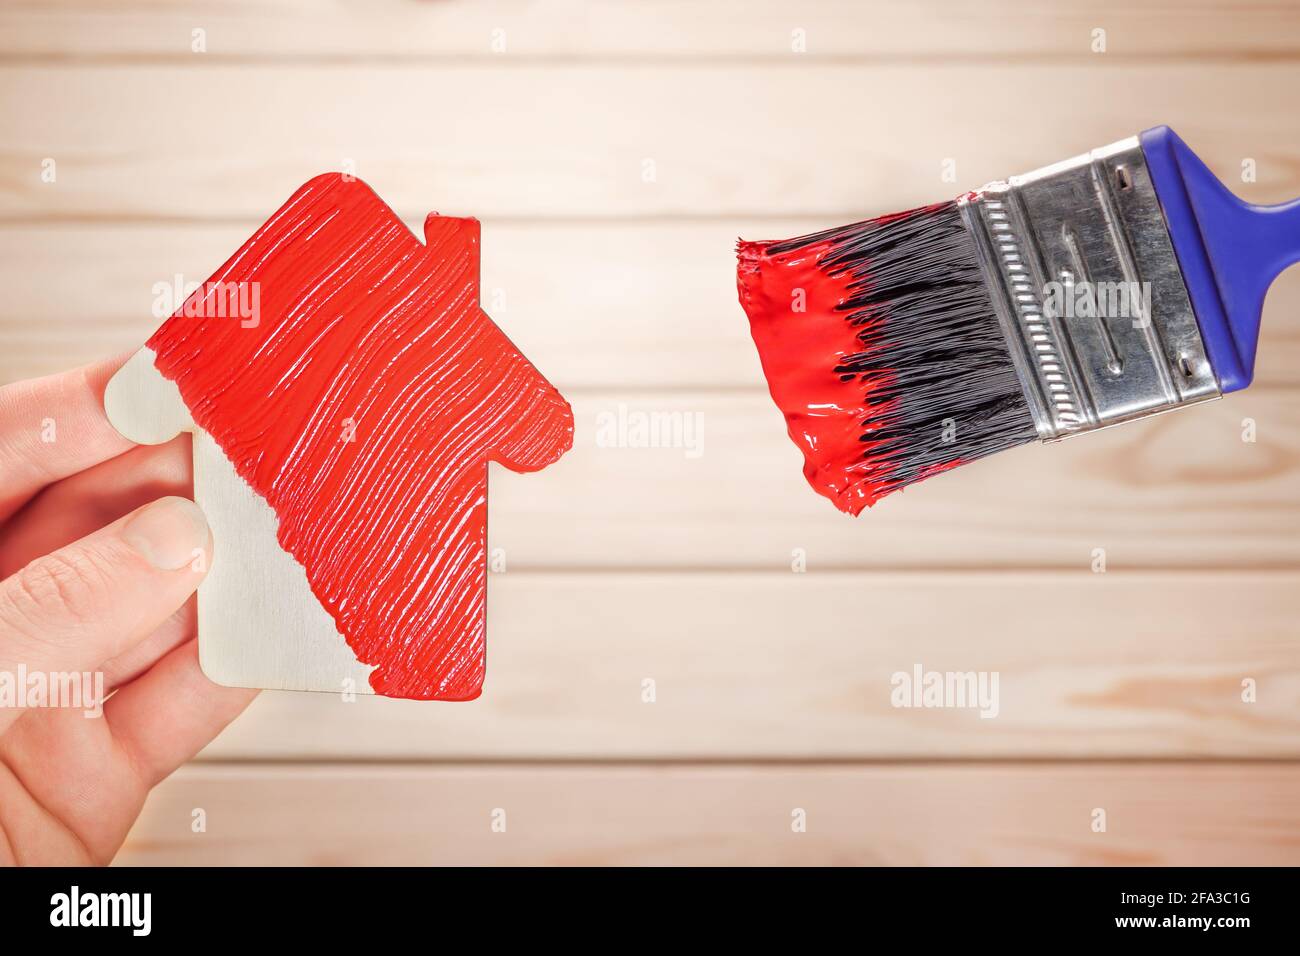 Symbol house painting brush in red colour. New home remodeling renovation paint facade. Painting work house icon renovation home construction model Stock Photo